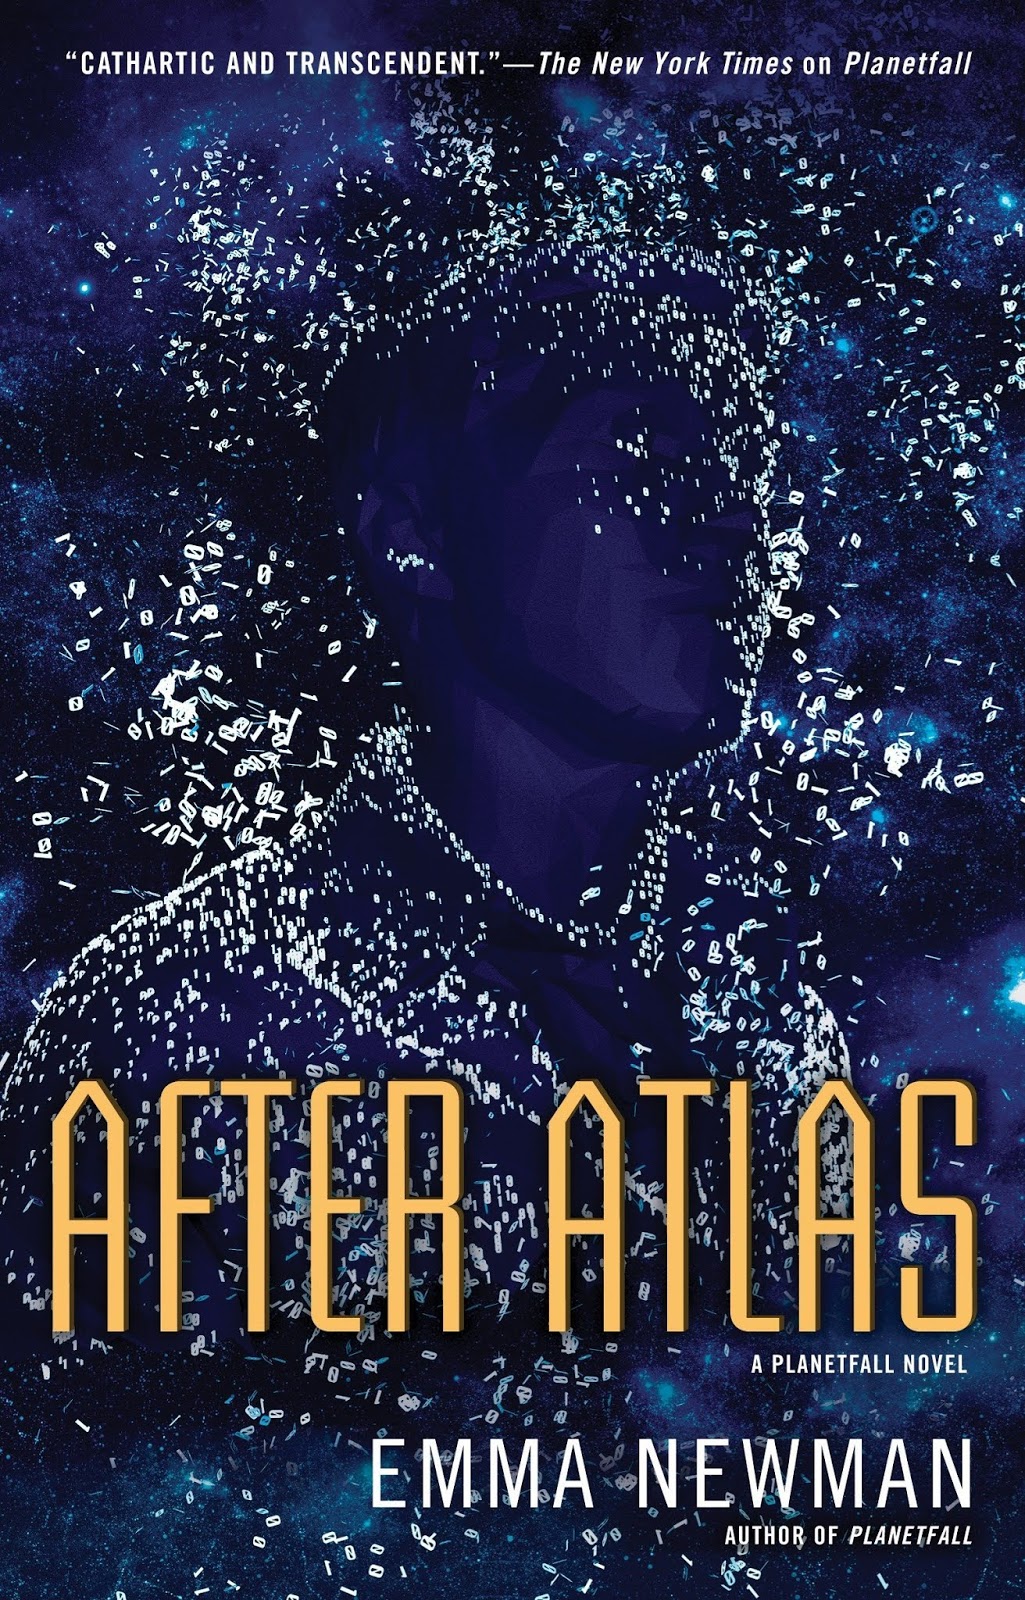 After Atlas / Before Mars